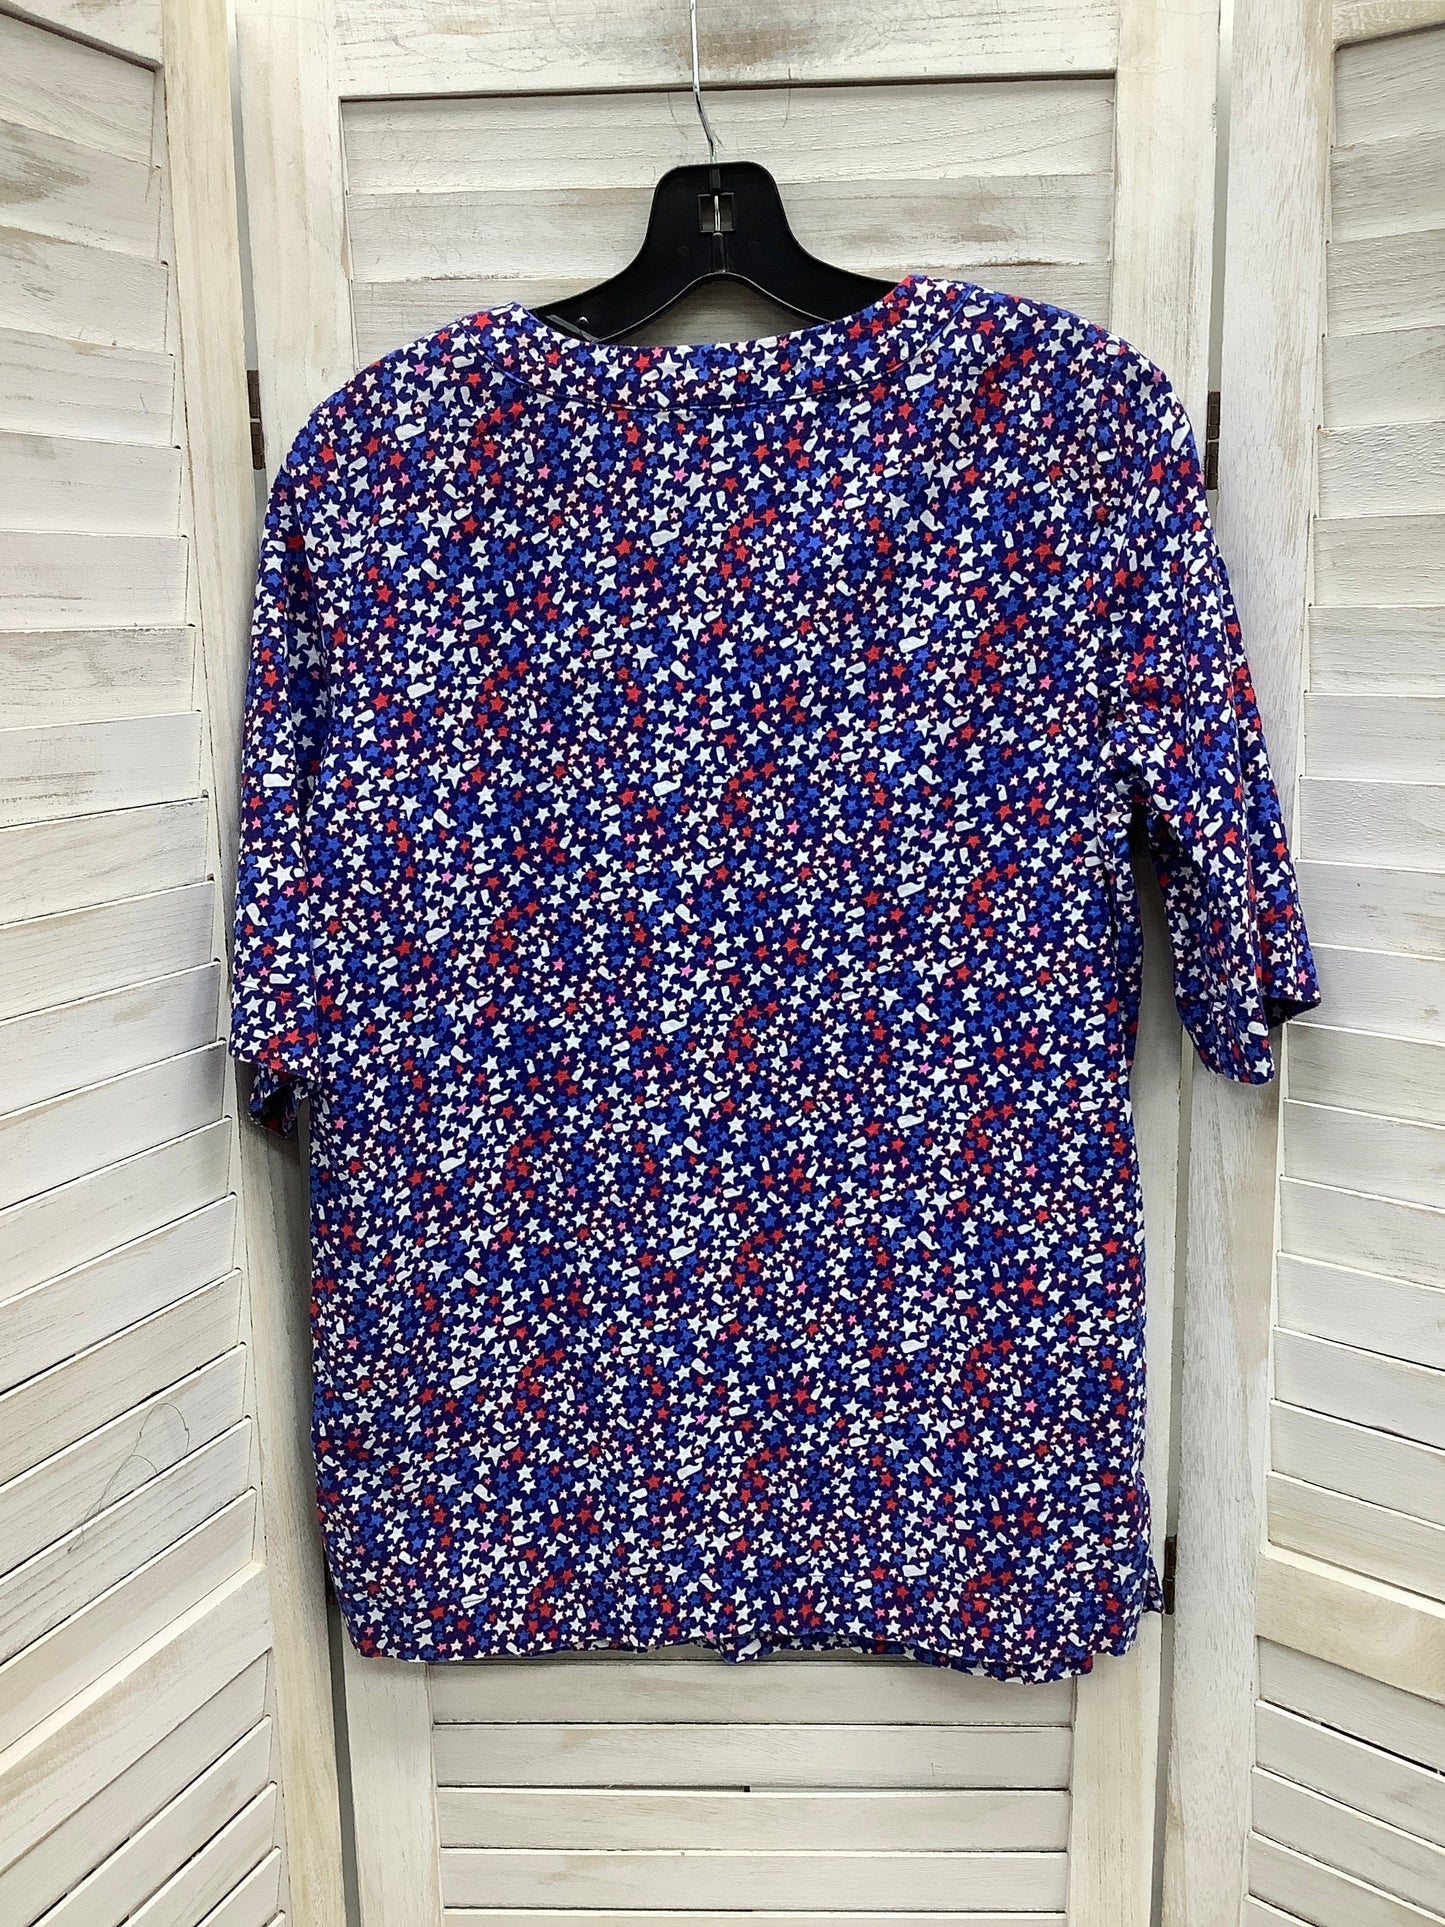 Tunic Short Sleeve By Vineyard Vines  Size: L